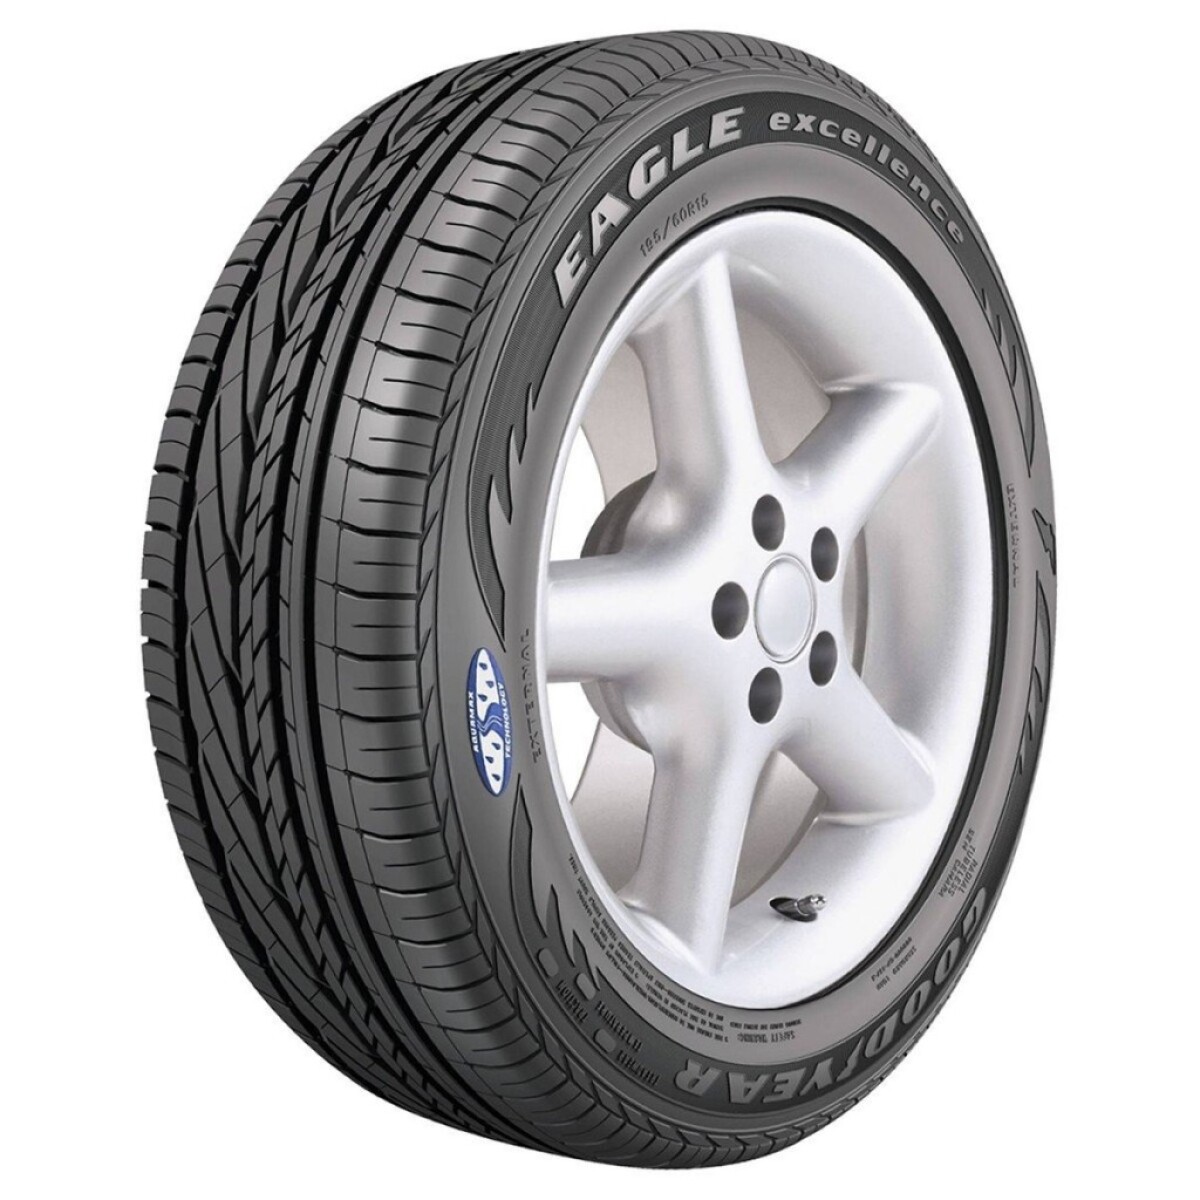 245/55 R17 GOODYEAR EAGLE EXCELLENCE ROF 102W 